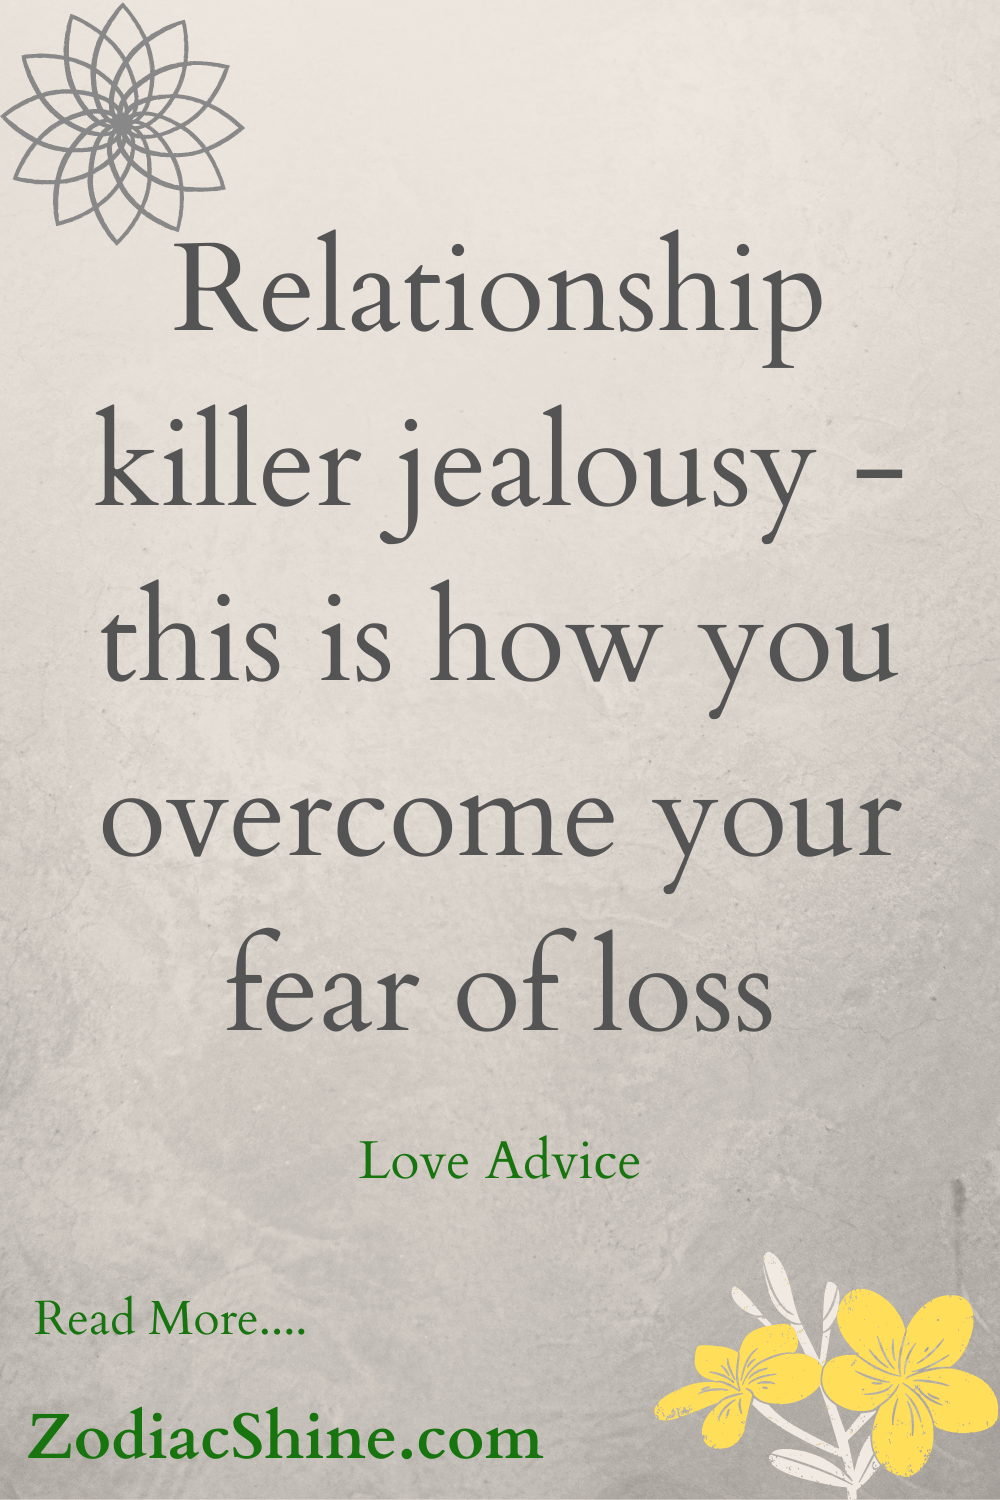 Relationship killer jealousy - this is how you overcome your fear of loss